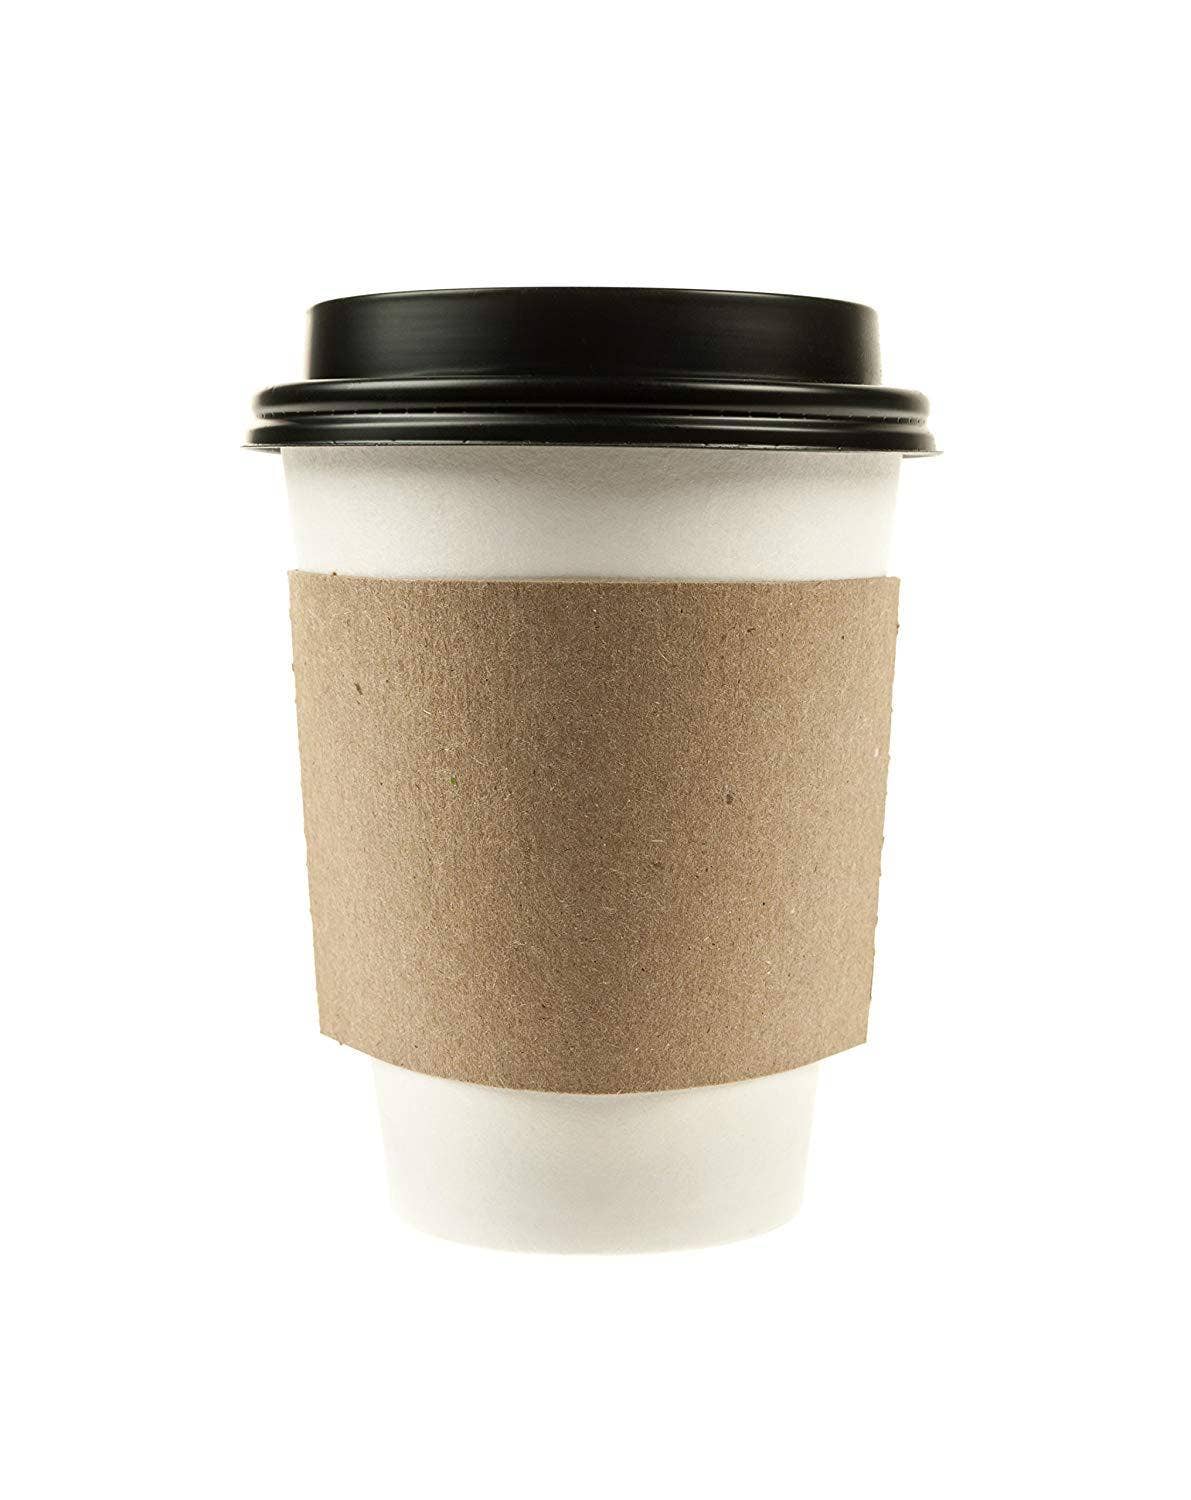 240 PACK) 16 oz. Double Layered Hot Cups With Lids – NATUREZWAY